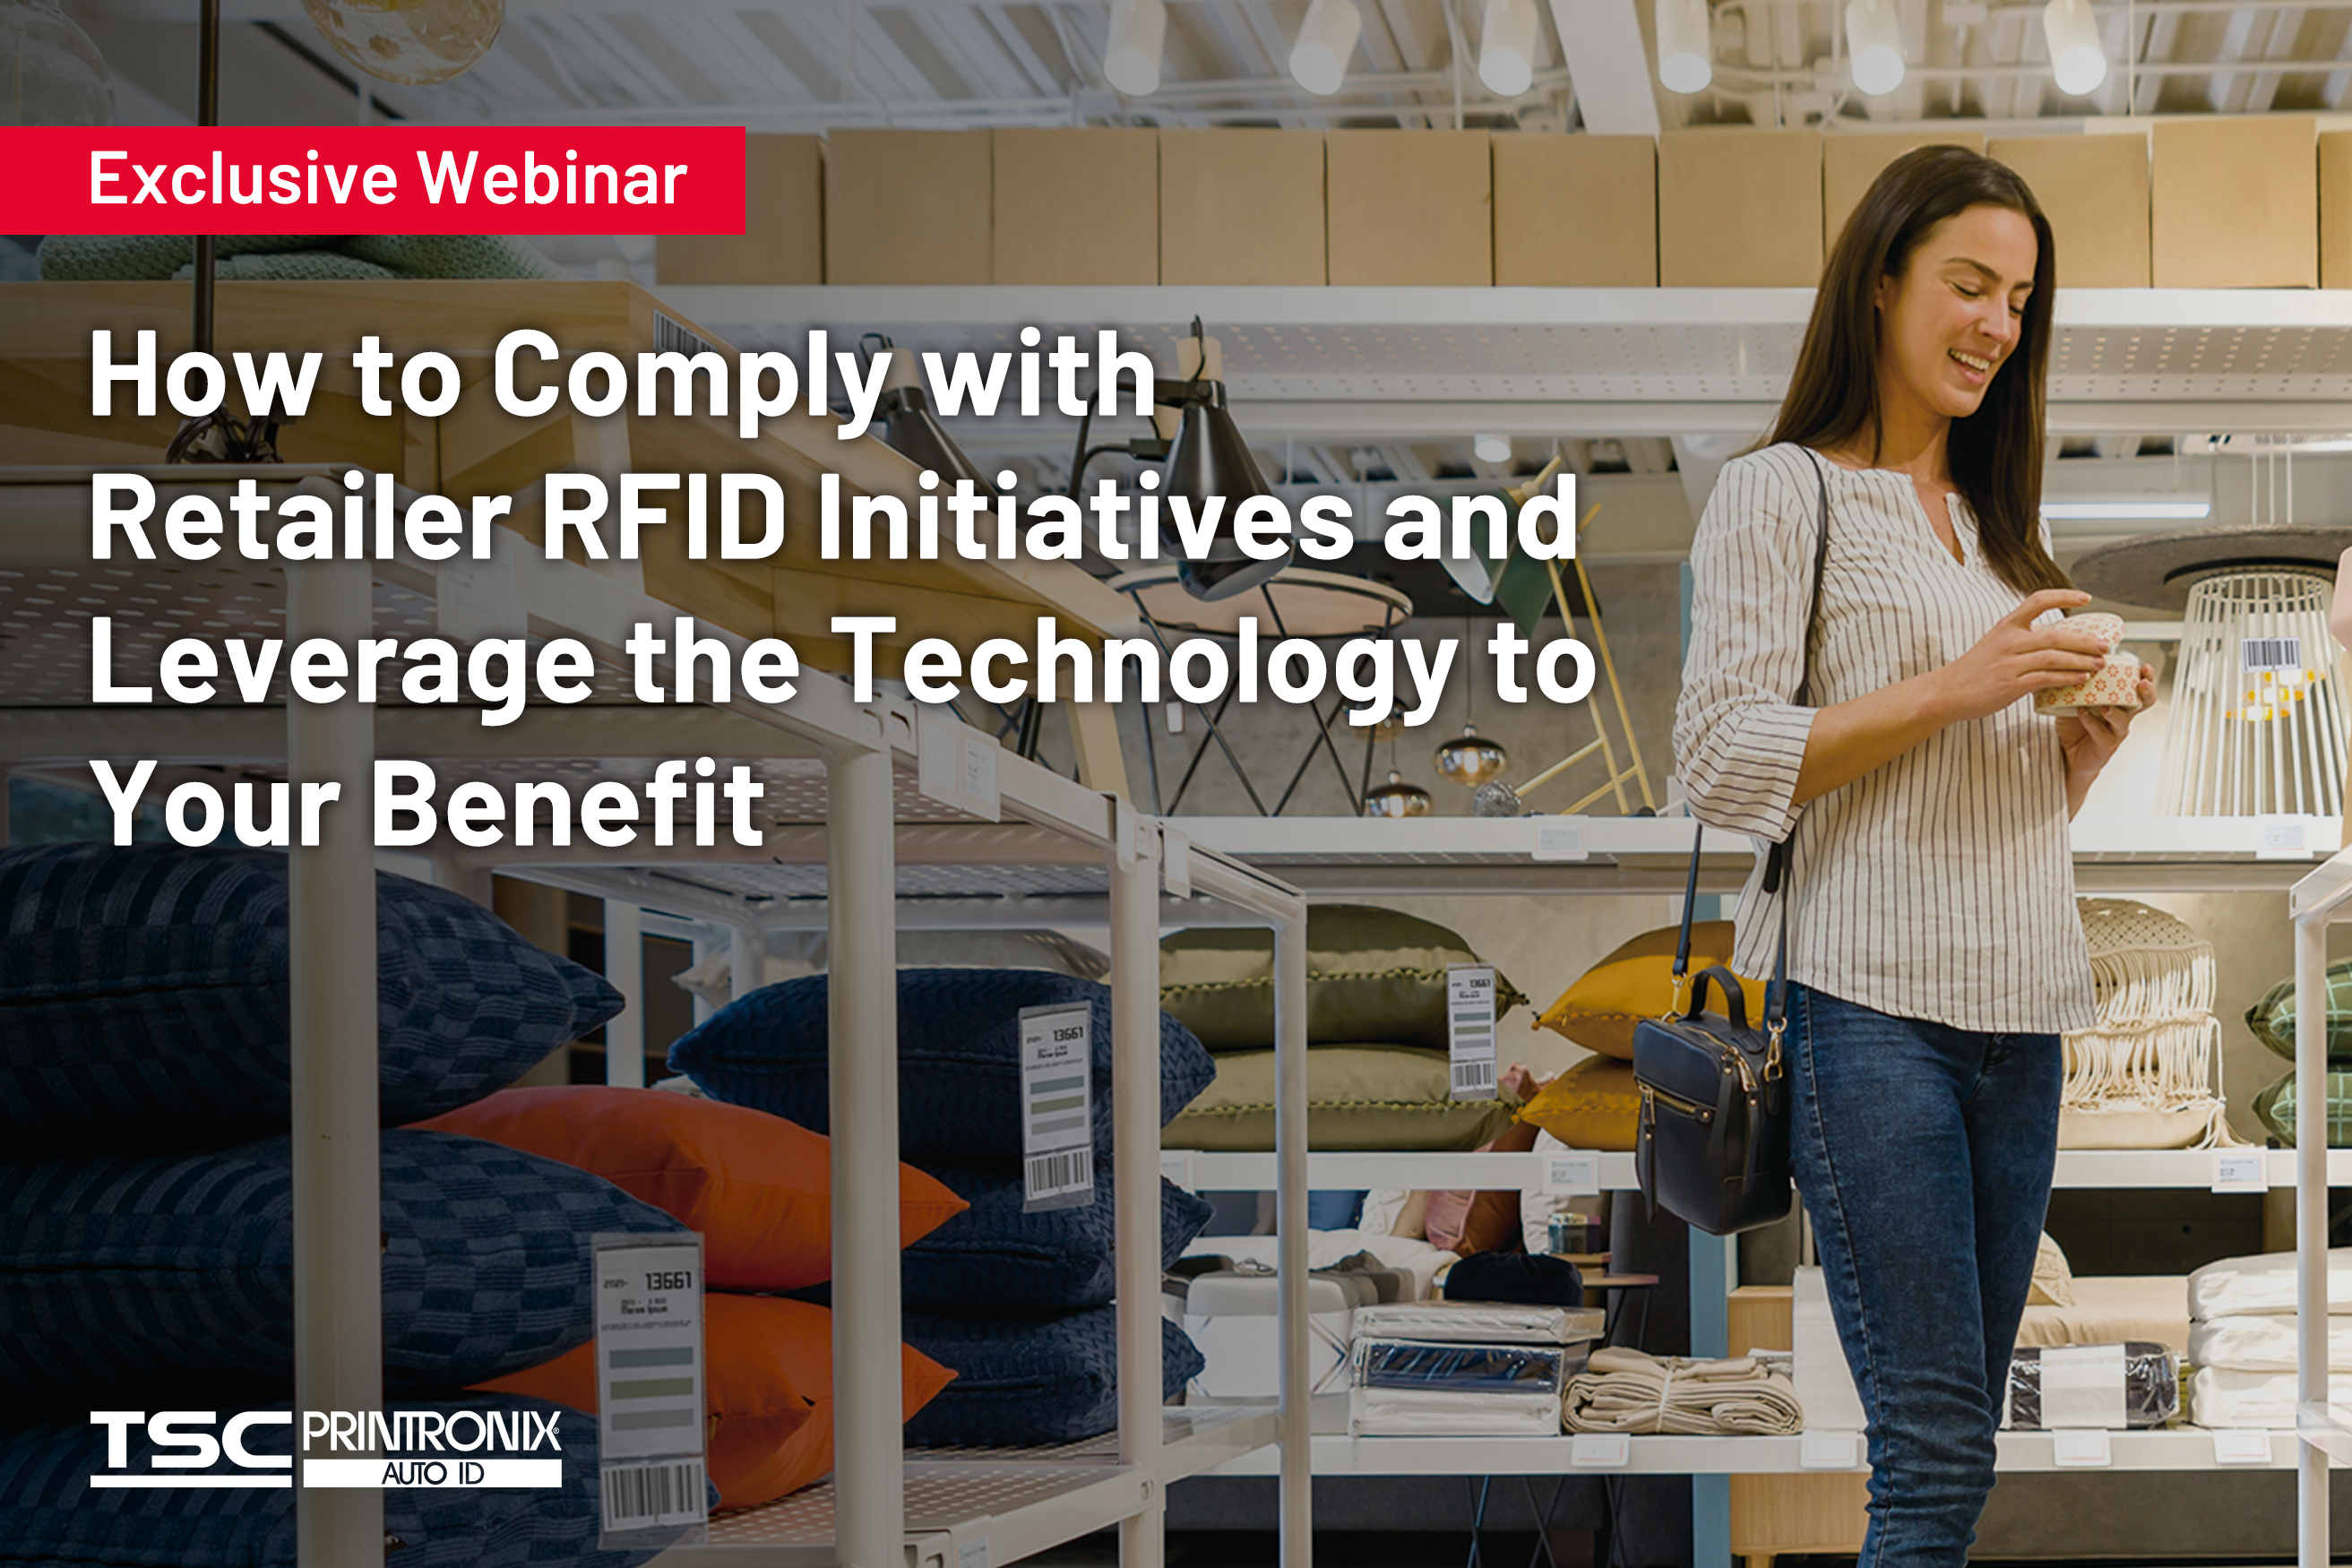 Exclusive Webinar - How to Comply with Retailer RFID Initiatives and Leverage the Technology to Your Benefit